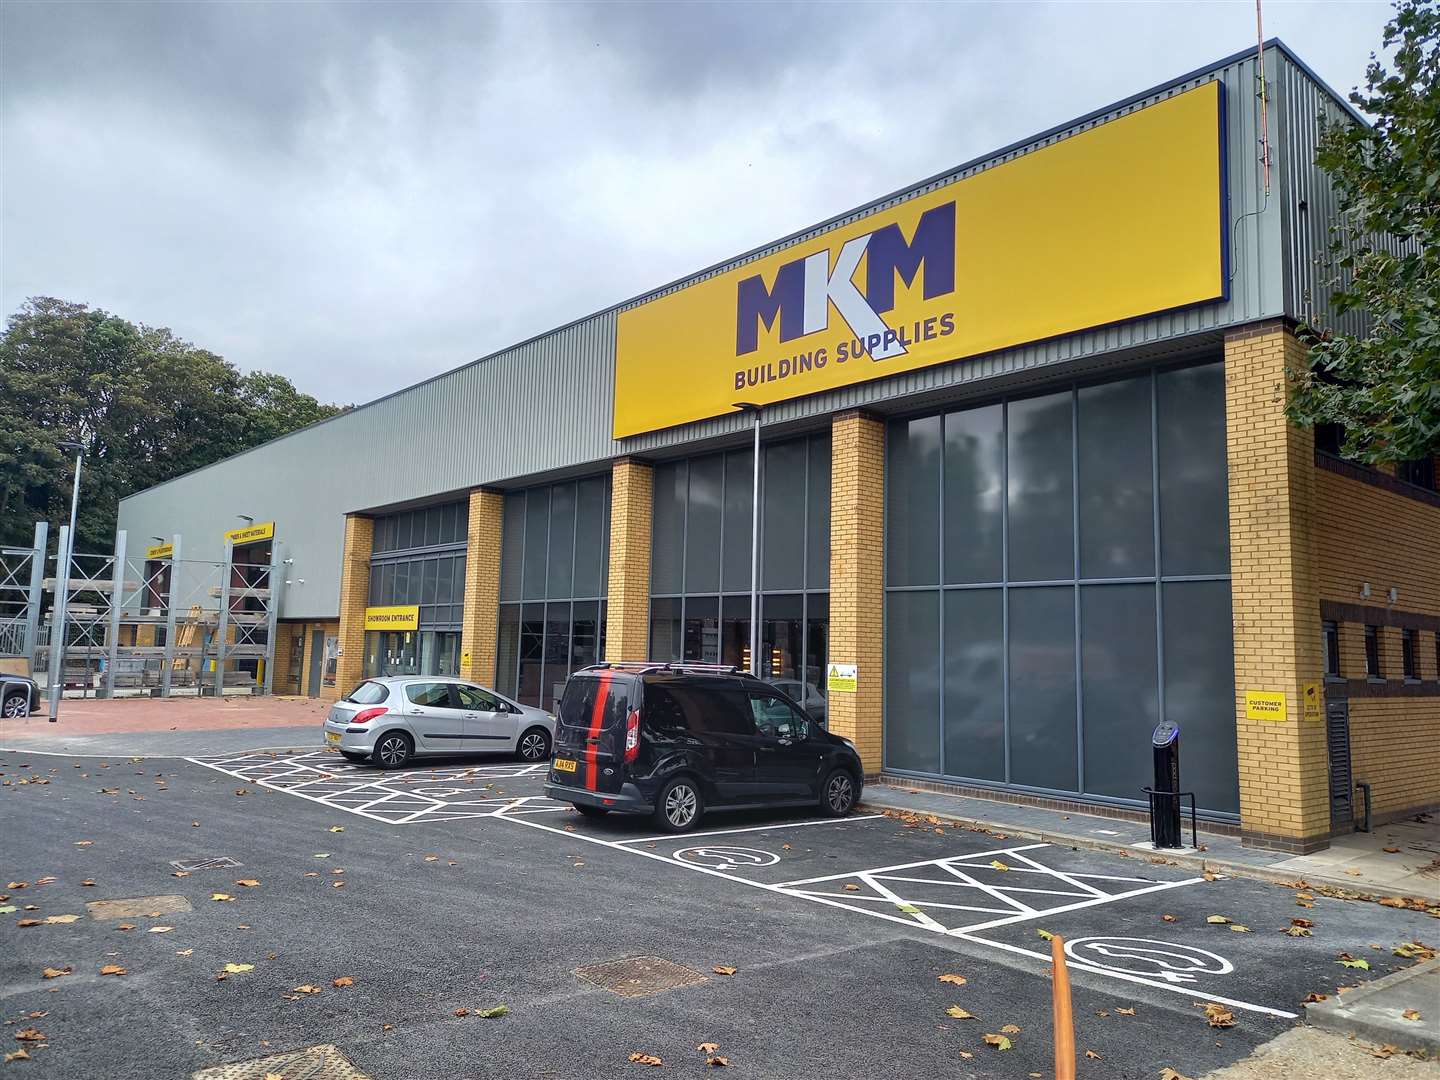 MKM Building Supplies has taken over the former Homebase site in Wincheap